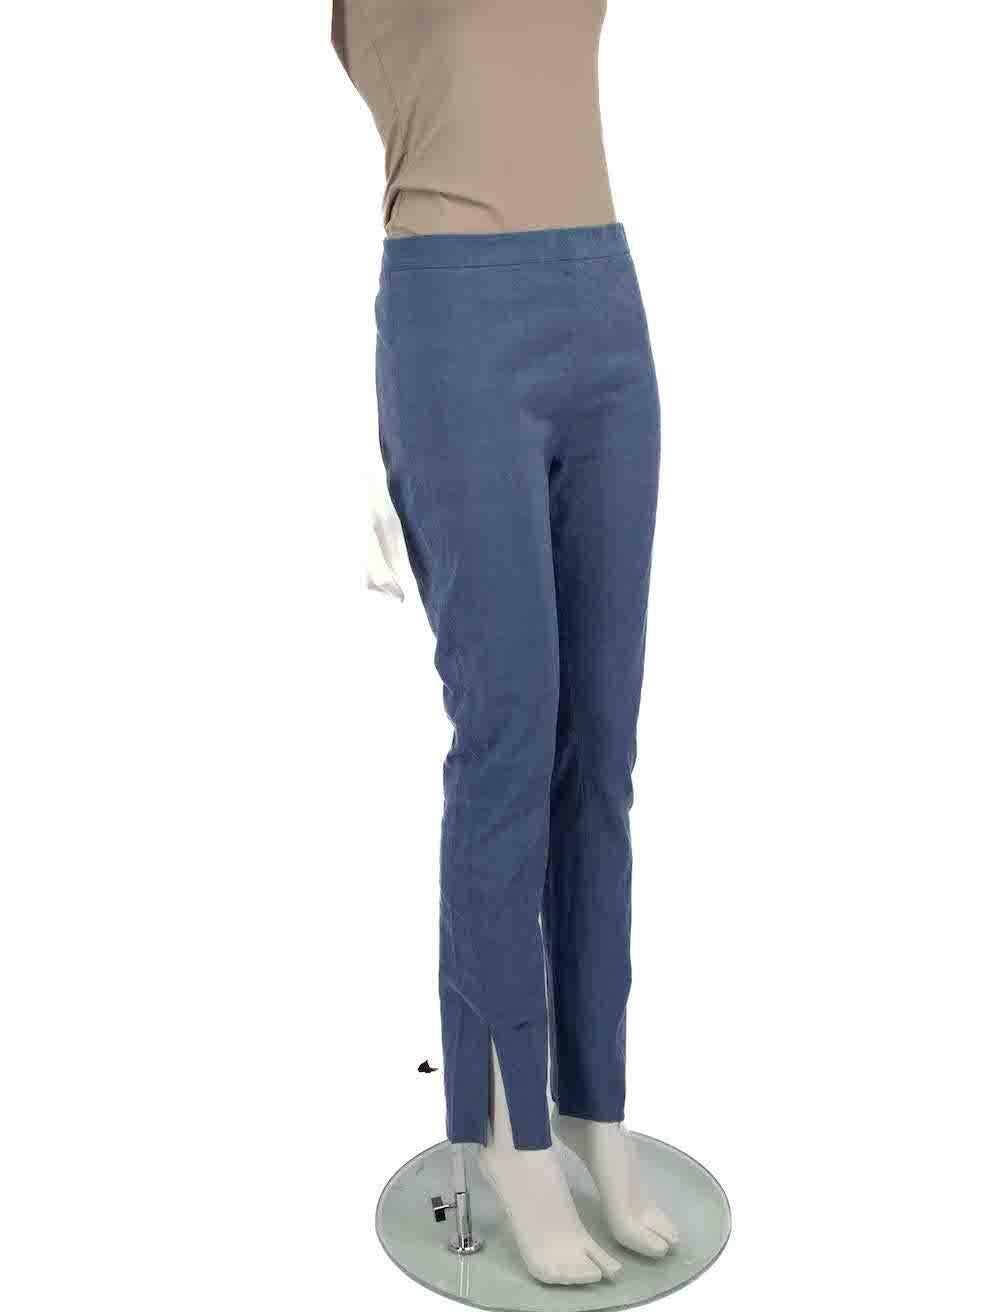 CONDITION is Very good. Hardly any visible wear to trousers is evident on this used Acne Studios designer resale item.
 
 
 
 Details
 
 
 Blue
 
 Viscose
 
 Trousers
 
 Slim fit
 
 Mid rise
 
 Side zip and hook fastening
 
 
 
 
 
 Made in